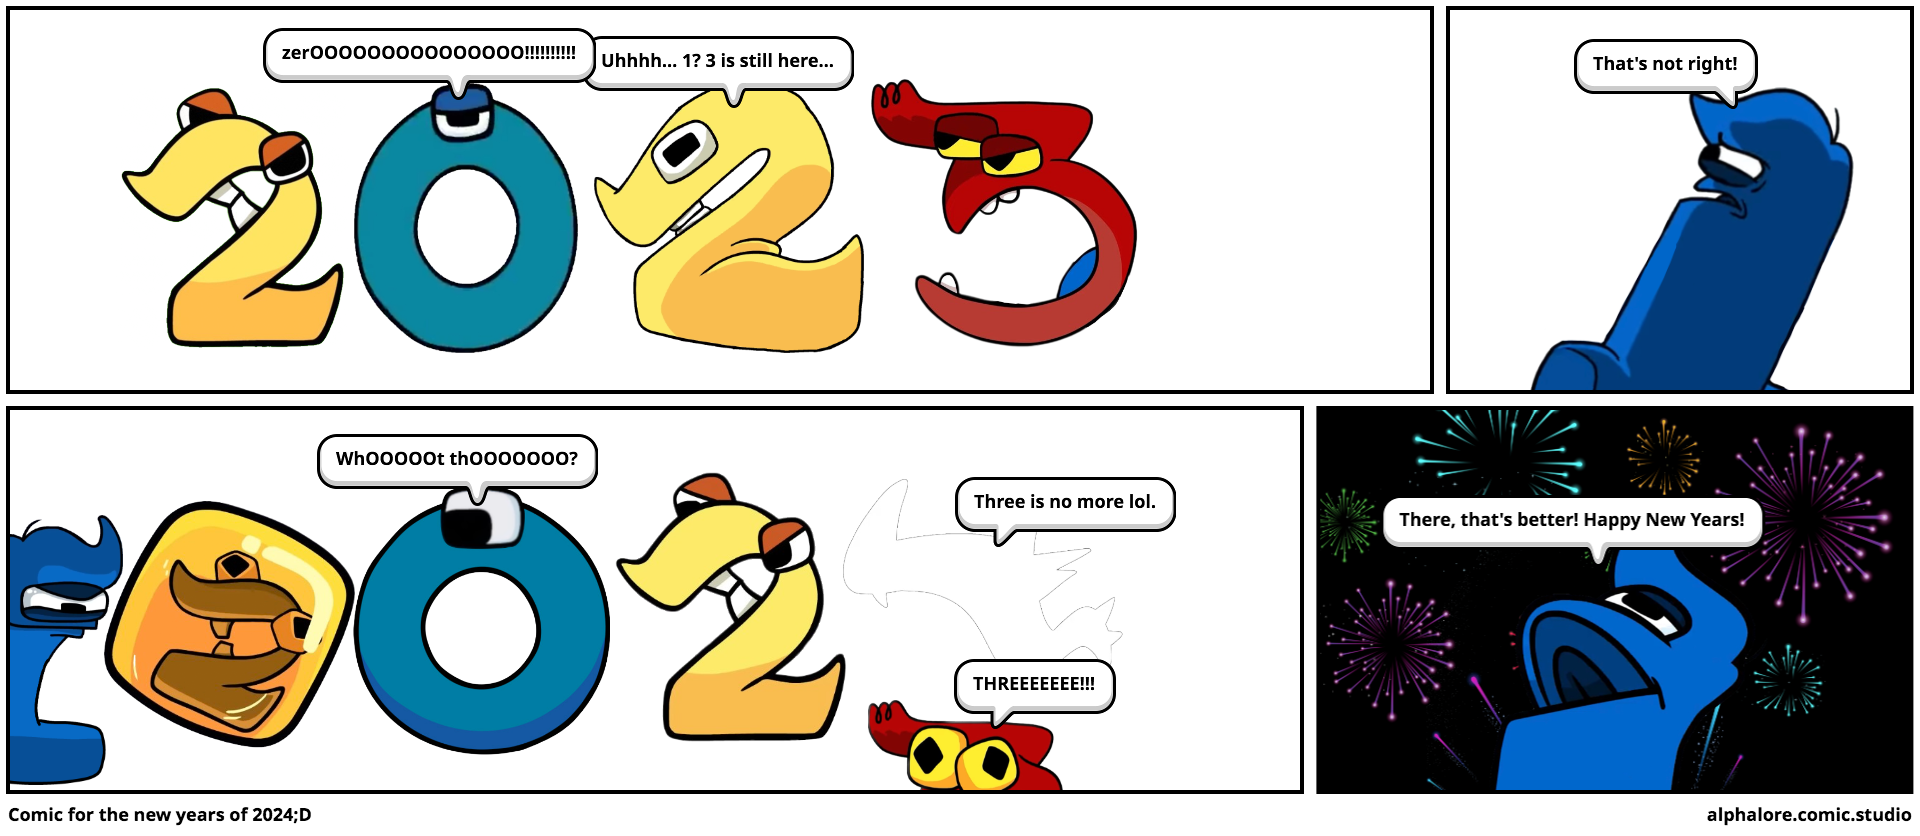 Comic for the new years of 2024;D